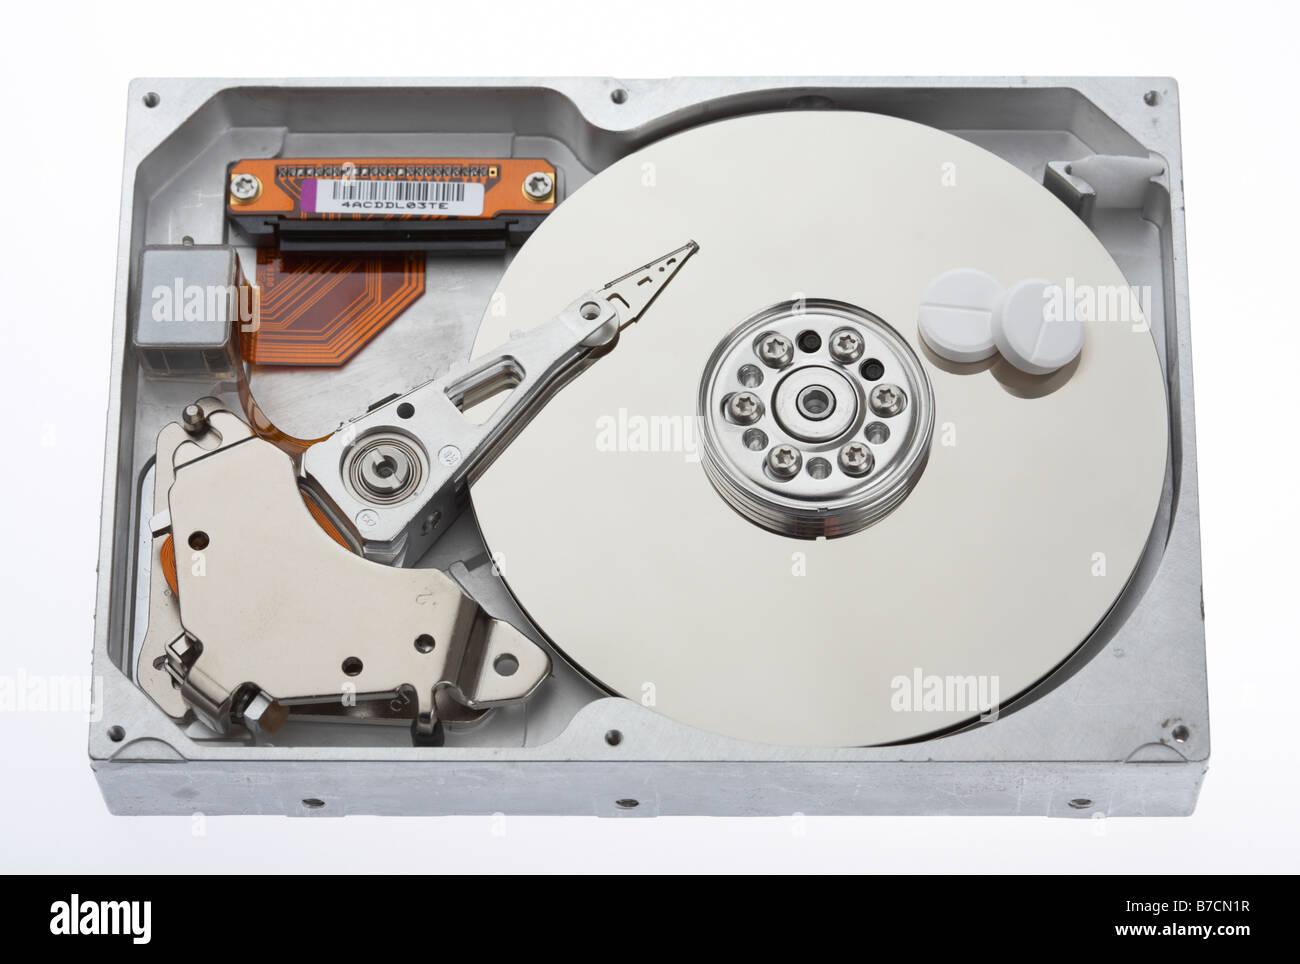 two paracetamol tablets sitting on the platter of a computer hard drive Stock Photo